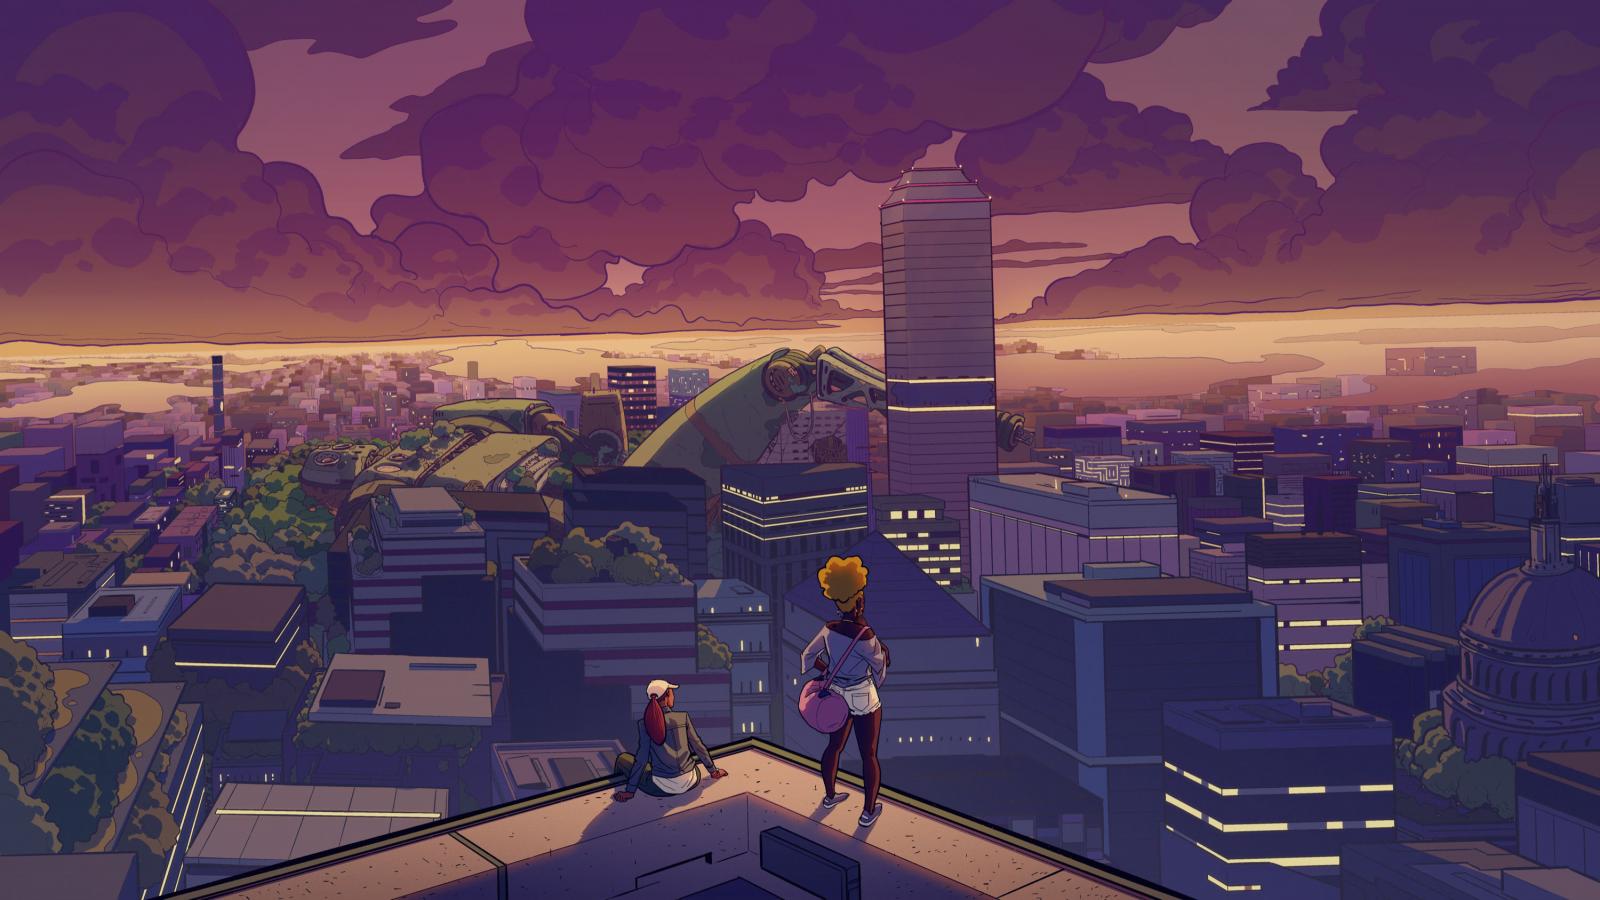 Illustrated Afrofuturist scene with two people looking out over a city